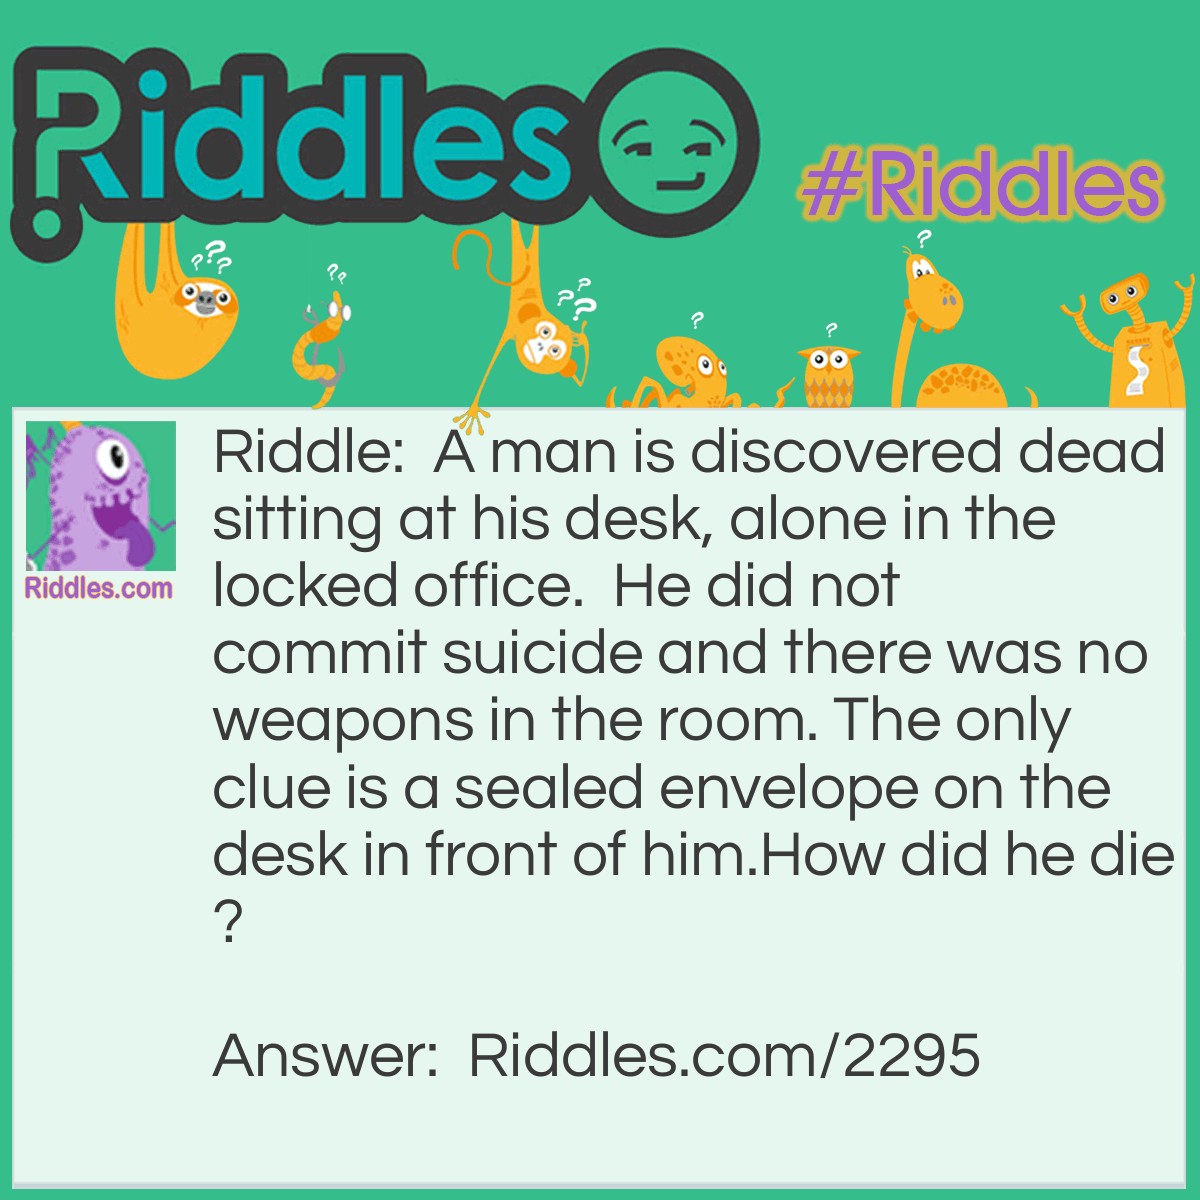 Riddle: A man is discovered dead sitting at his desk, alone in the locked office.  He did not commit suicide and there was no weapons in the room. The only clue is a sealed envelope on the desk in front of him.
How did he die? Answer: The envelope glue was poisoned and when the man licked the envelope to seal it, he died.